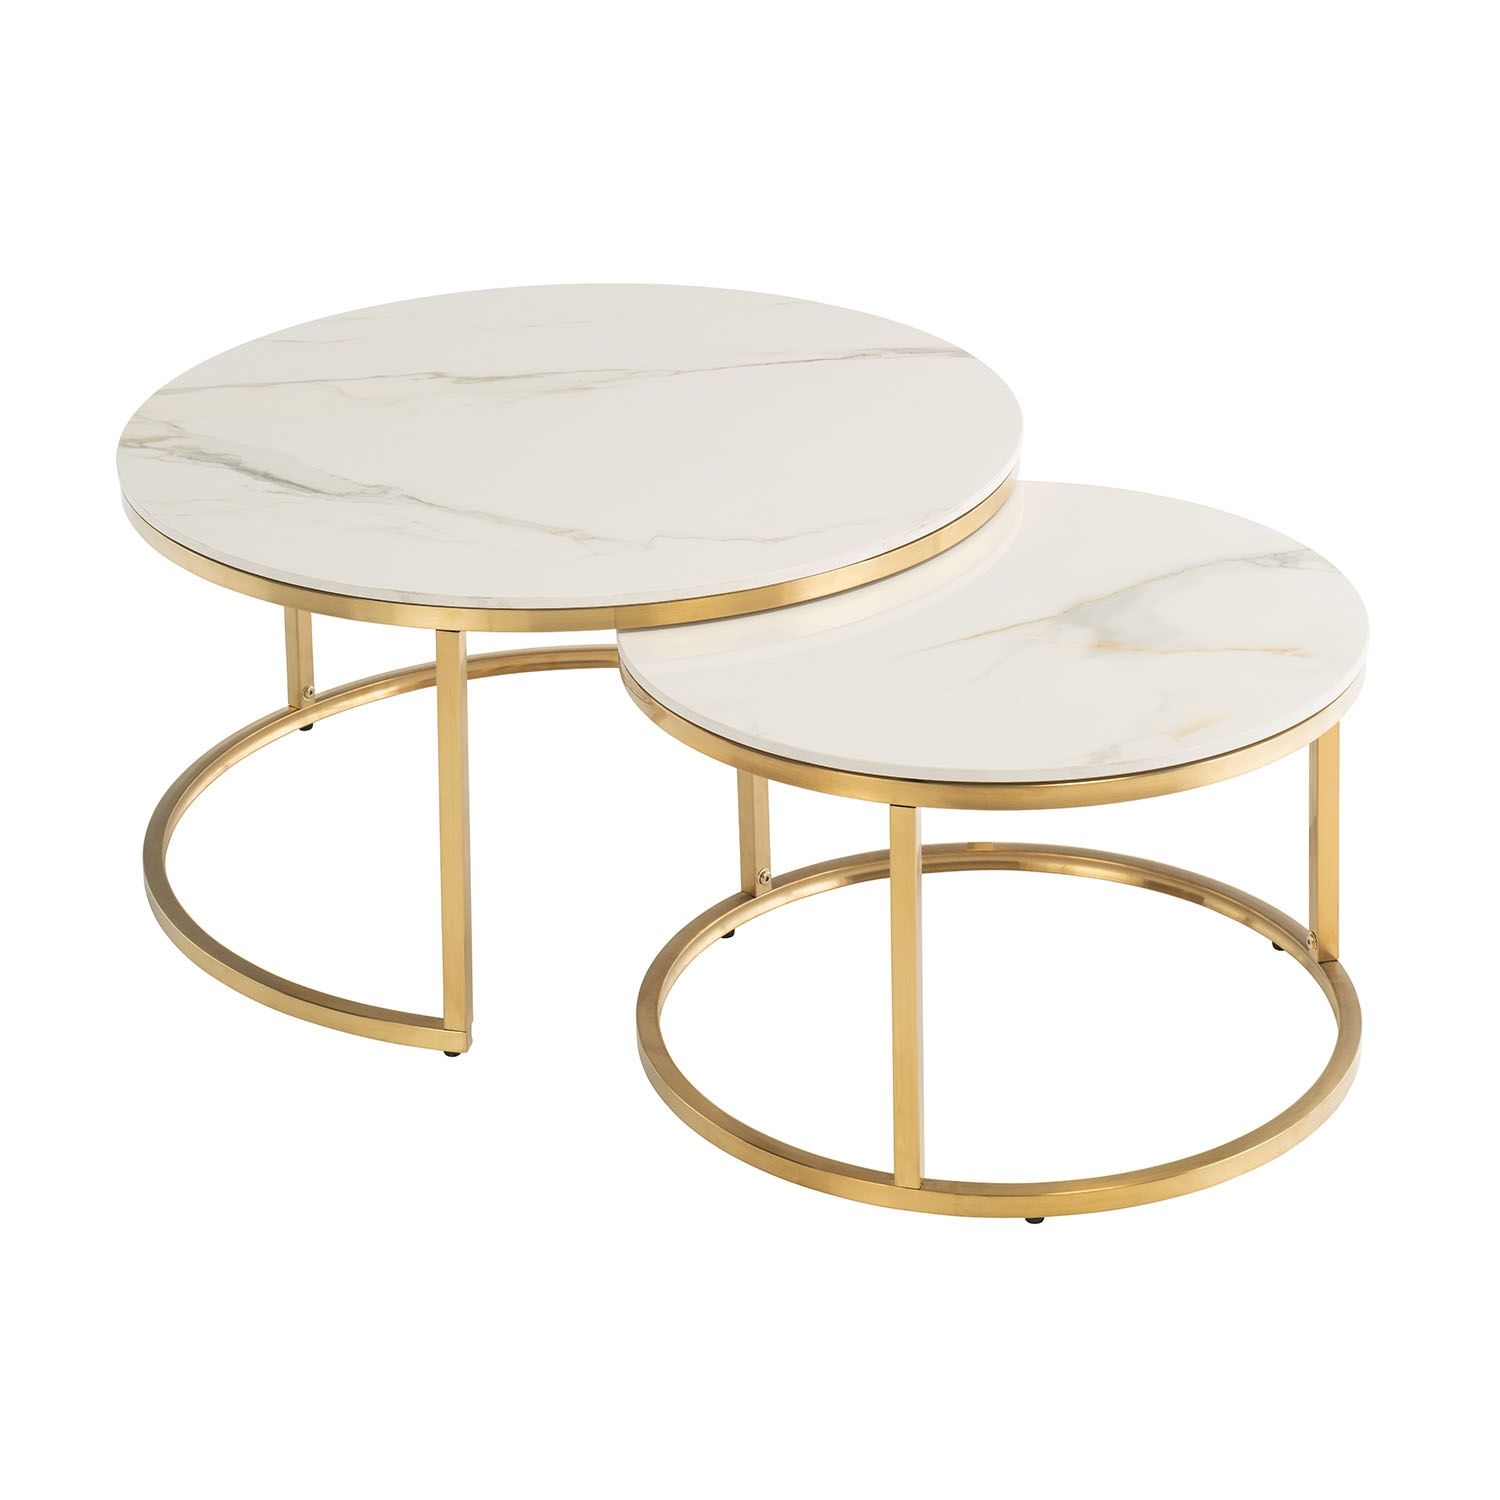 Philadelphia Round Coffee Table Set In Kass Gold Top And Brushed Gold Legs  – Furniture World Intended For Satin Gold Coffee Tables (View 8 of 20)